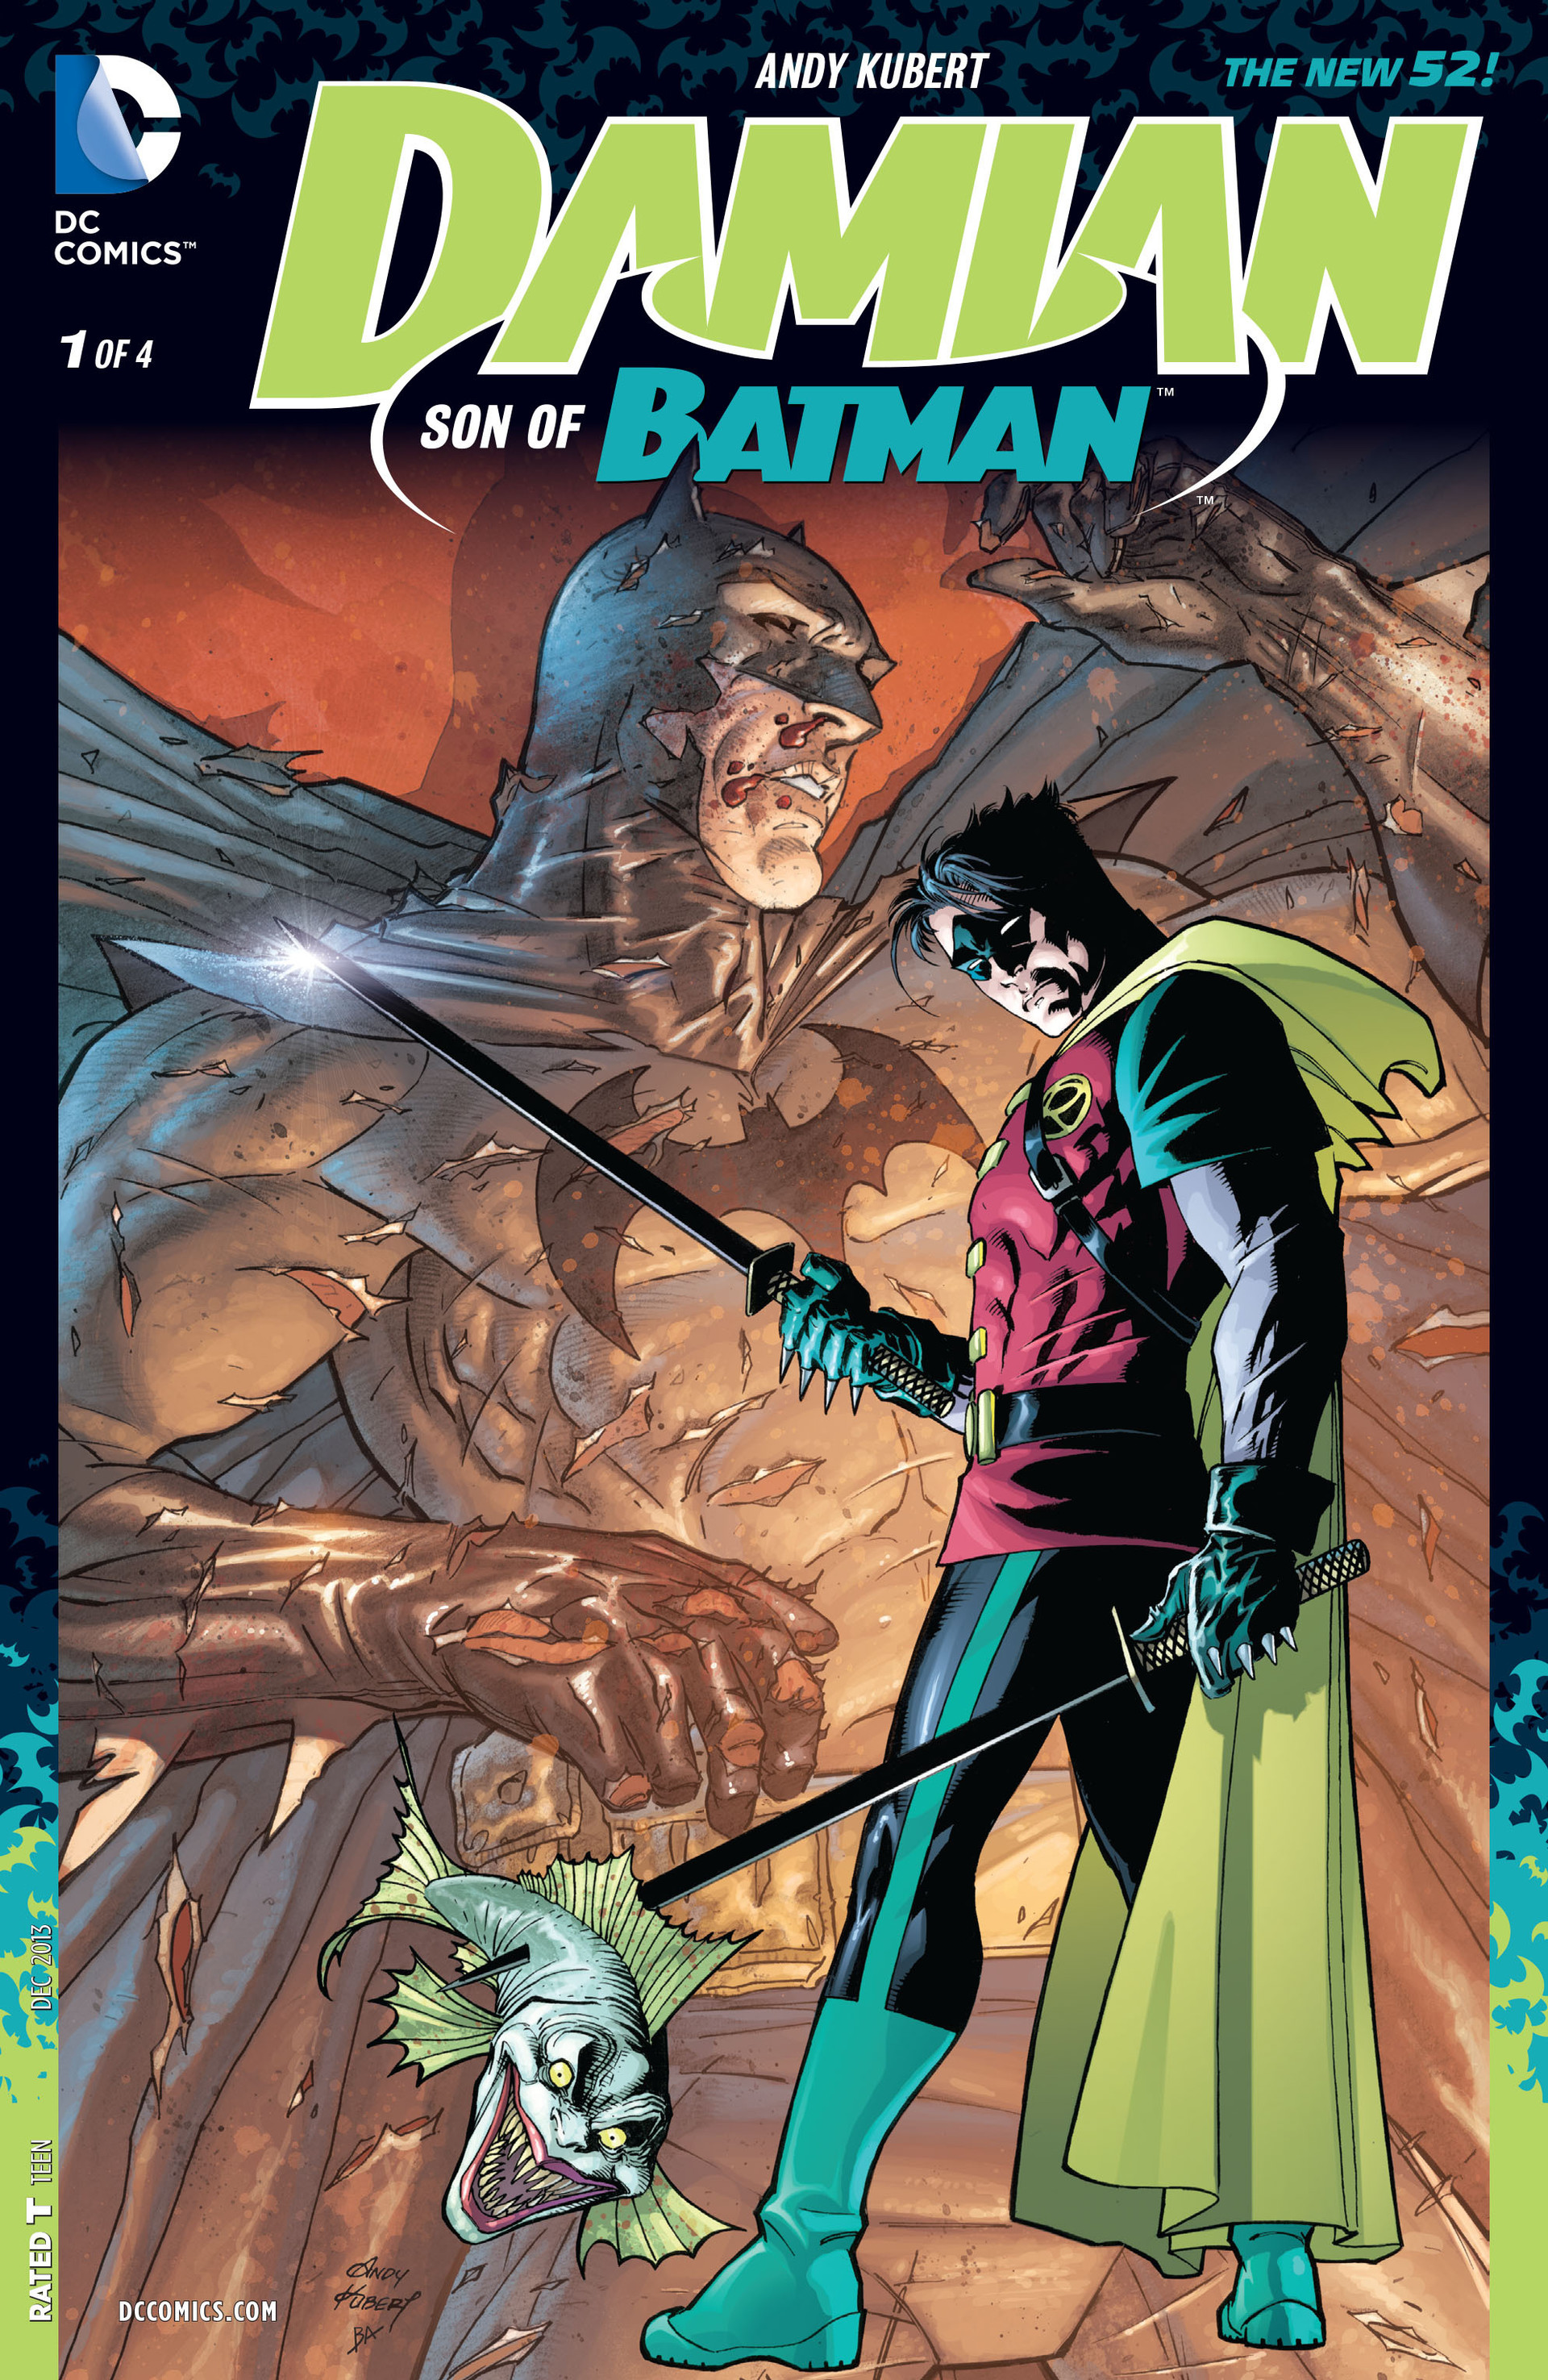 Damian Son Of Batman Issue 1 | Read Damian Son Of Batman Issue 1 comic  online in high quality. Read Full Comic online for free - Read comics online  in high quality .|